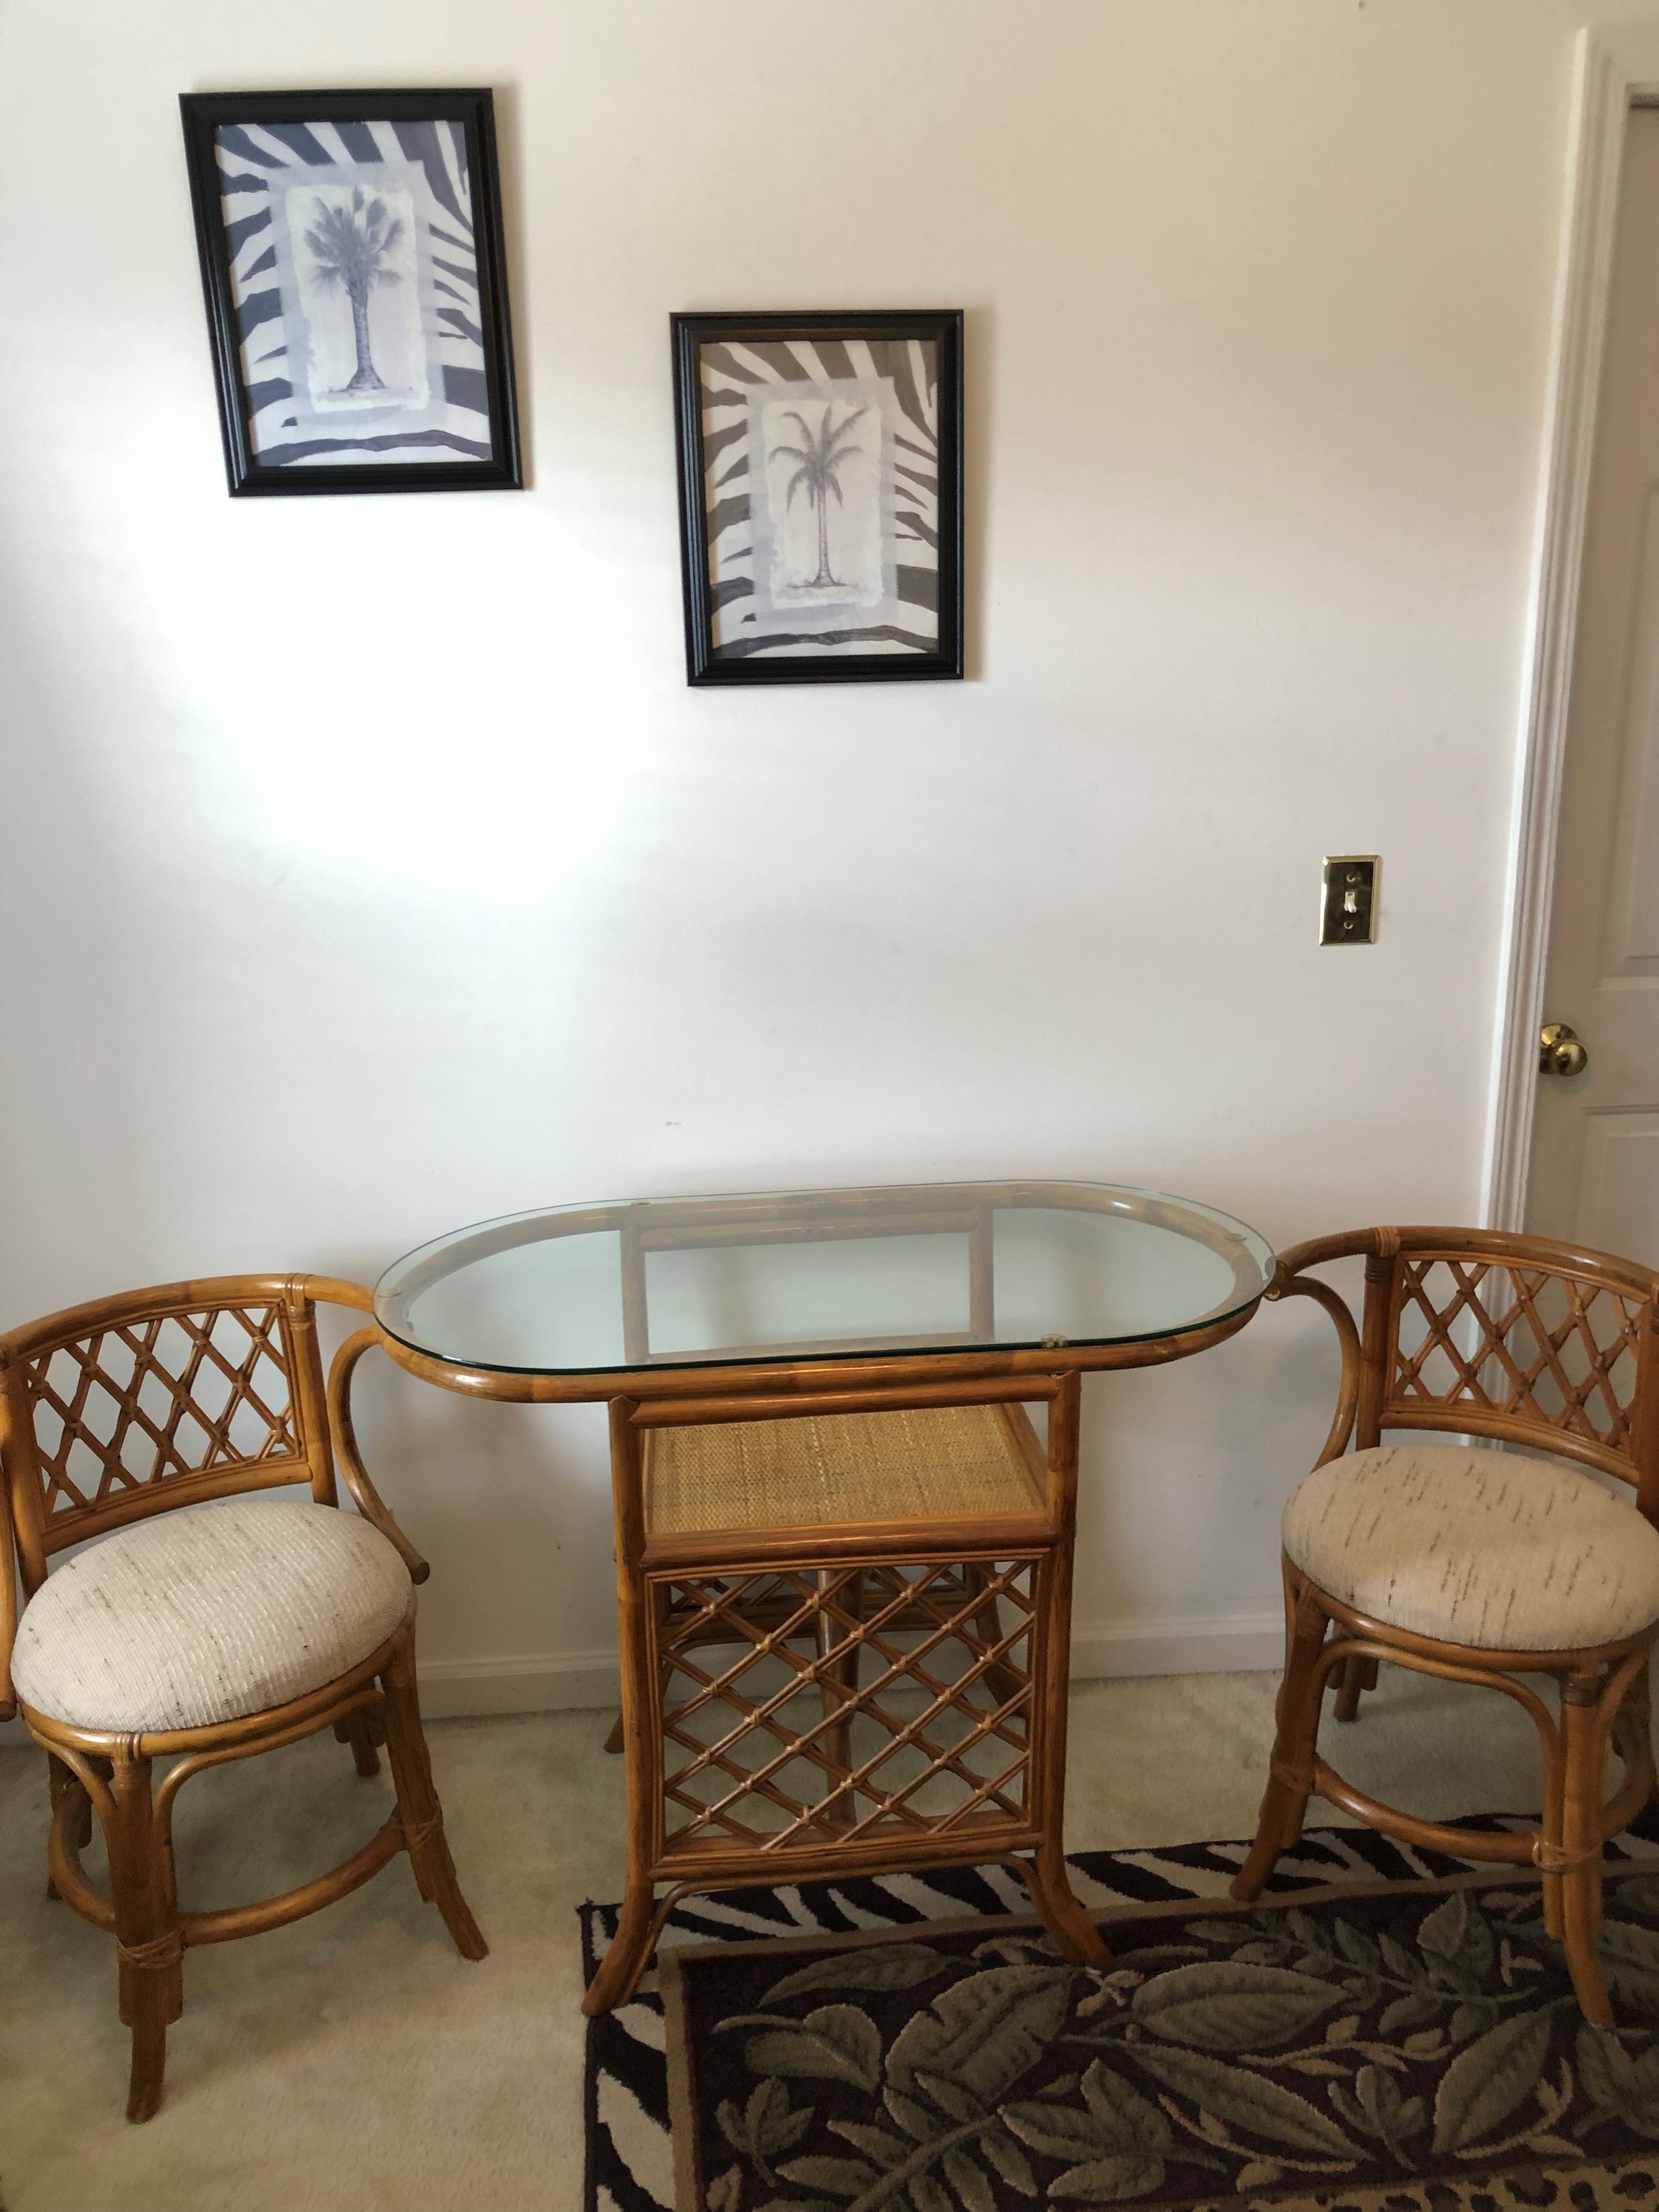 Rattan Chairs and Glass Top Table.jpg